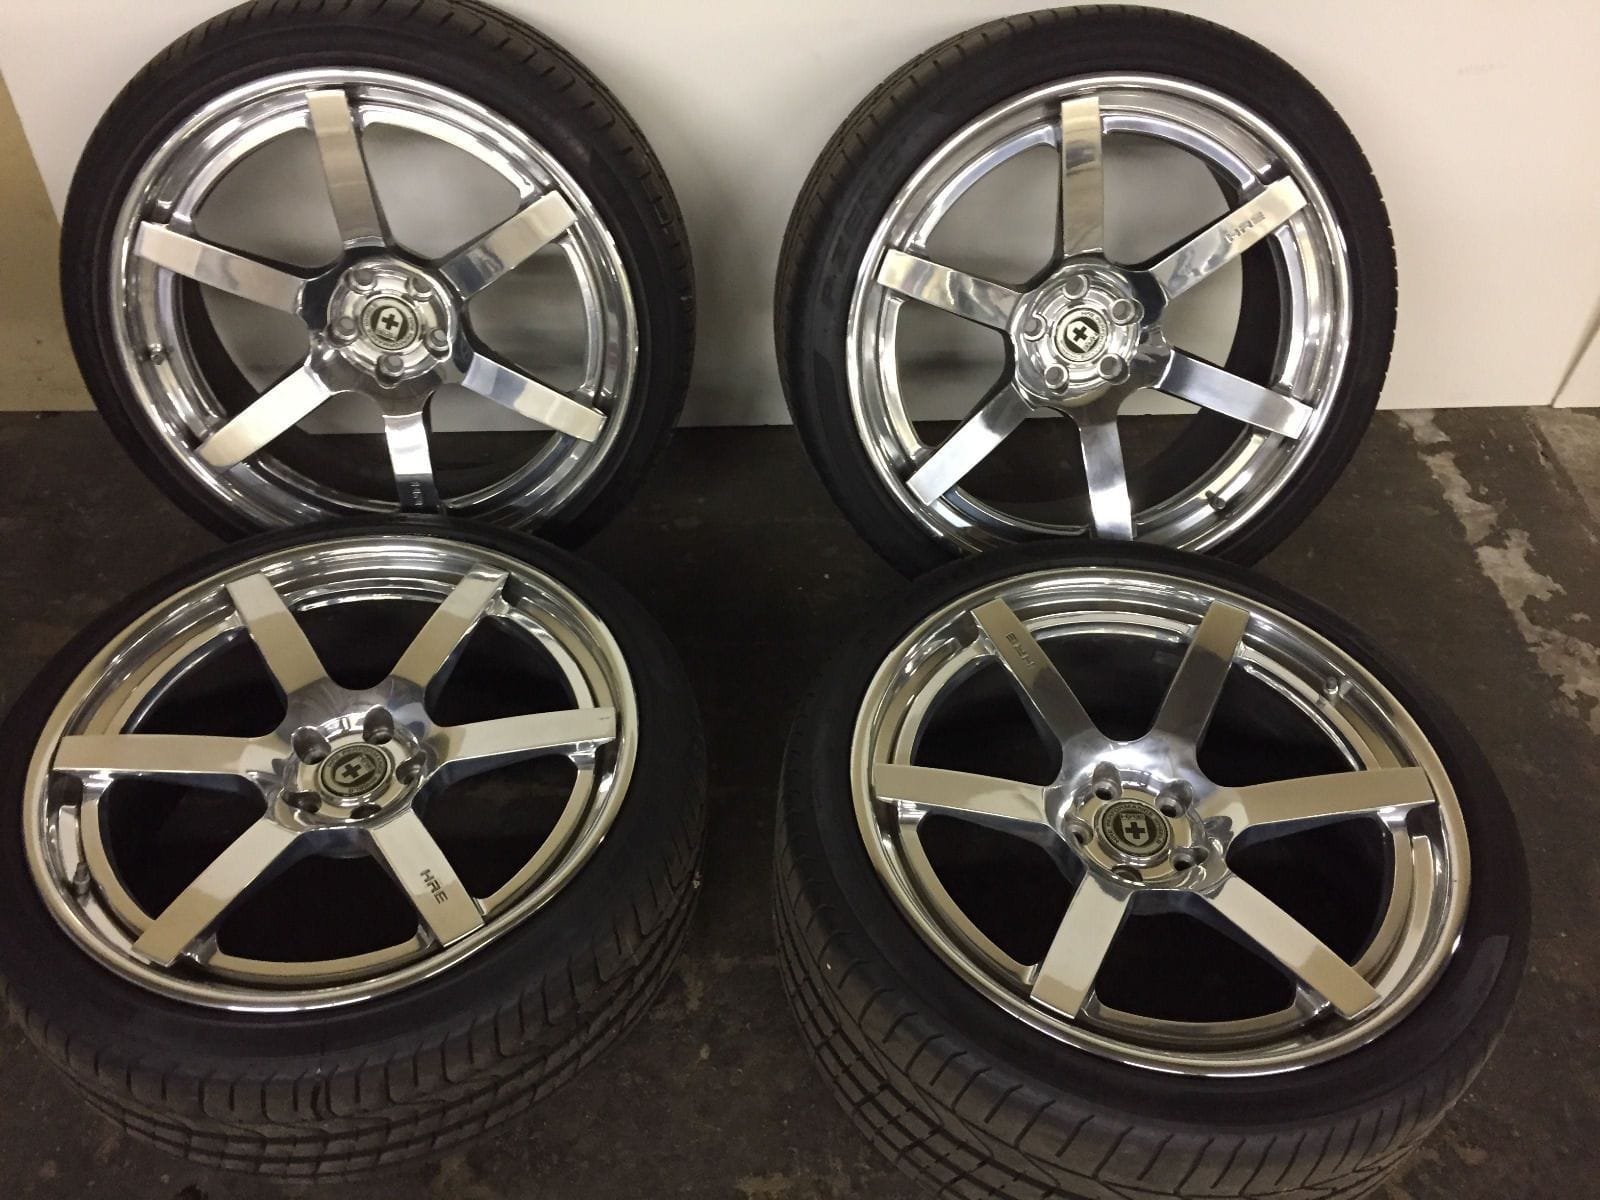 Wheels and Tires/Axles - 21-034-HRE-wheels-and-tires-RS106-5-112-Bolt-Pattern-Mercedes-S-class-S550-S63-S65 - Used - 2018 Mercedes-Benz S550 - Hanford, CA 93230, United States